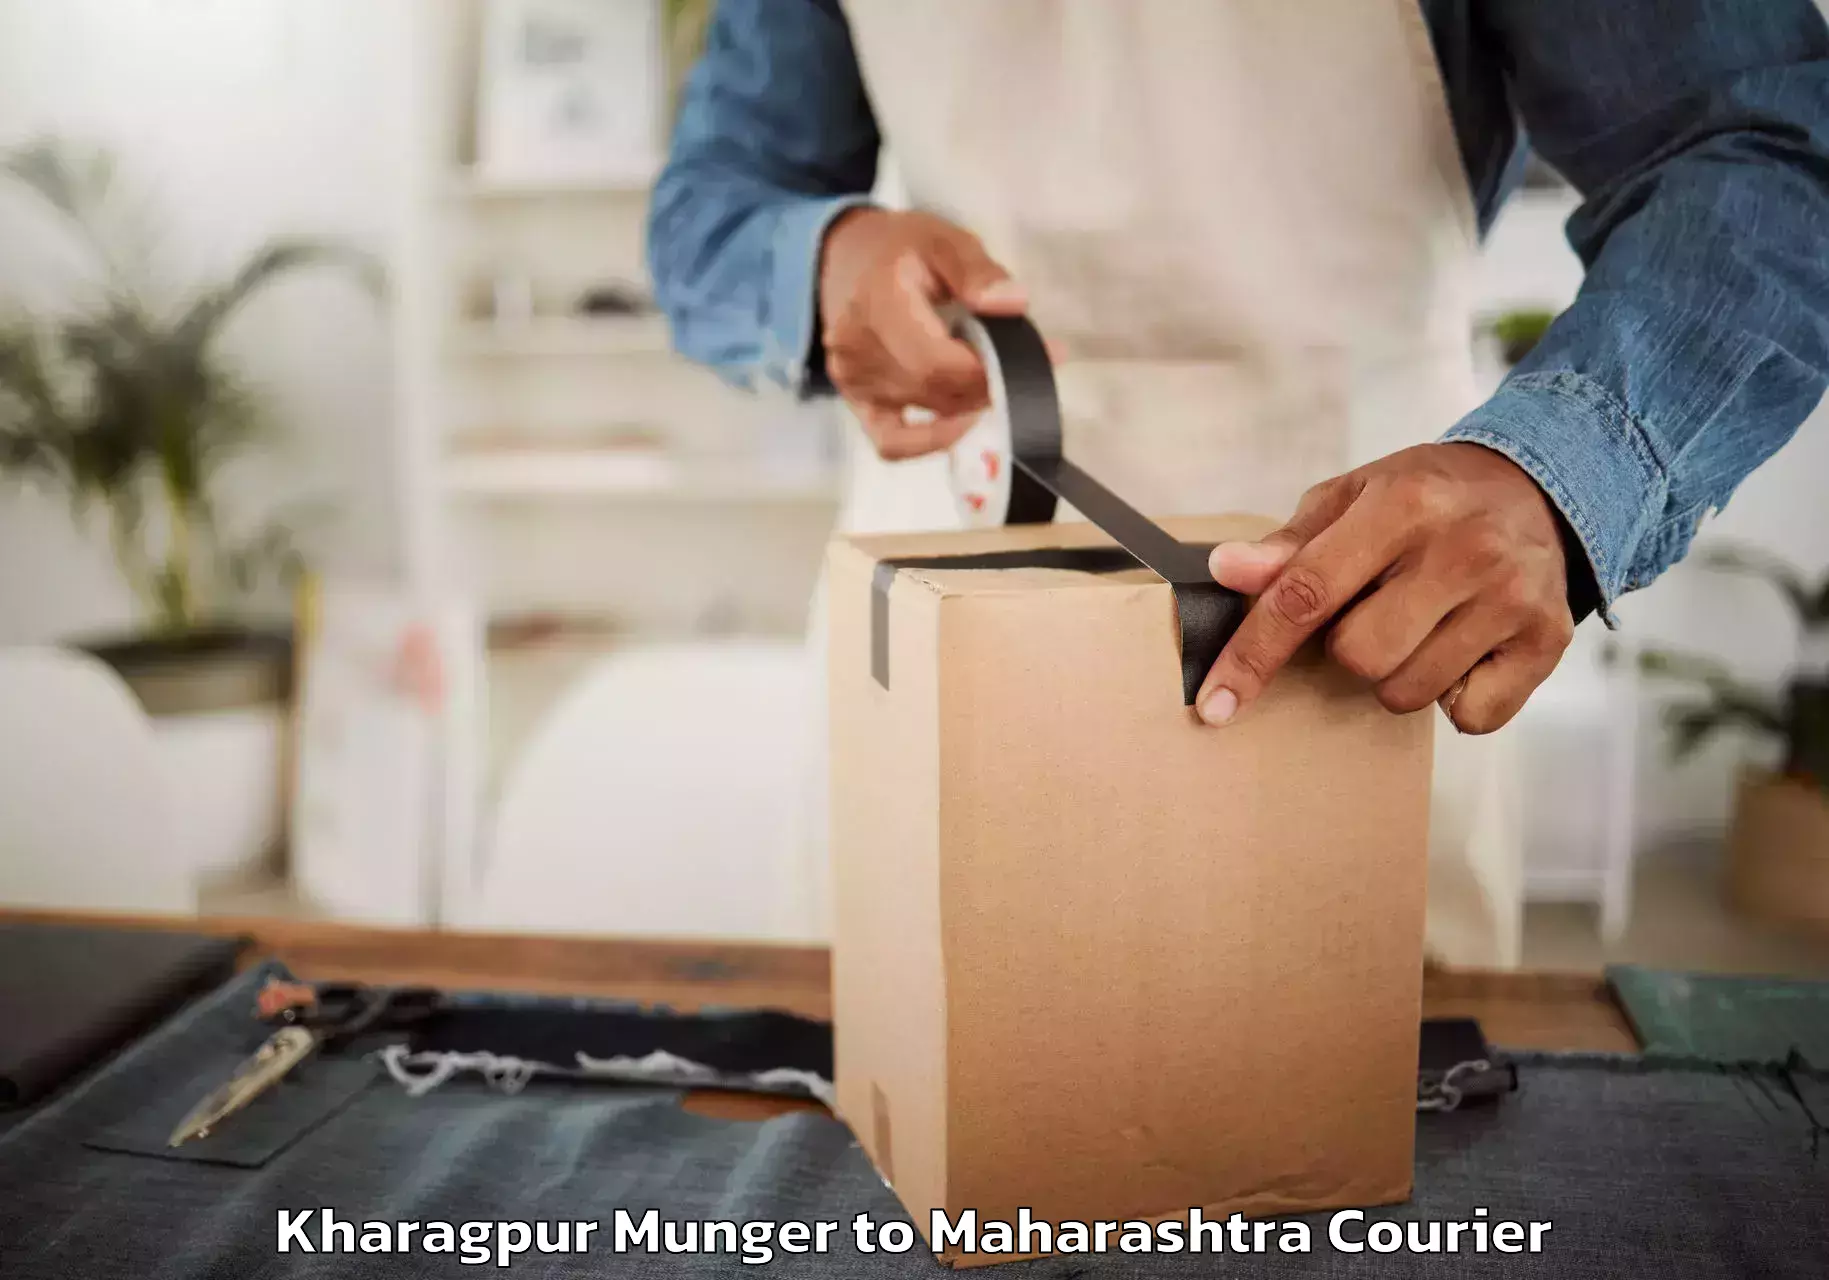 Reliable movers Kharagpur Munger to Jath